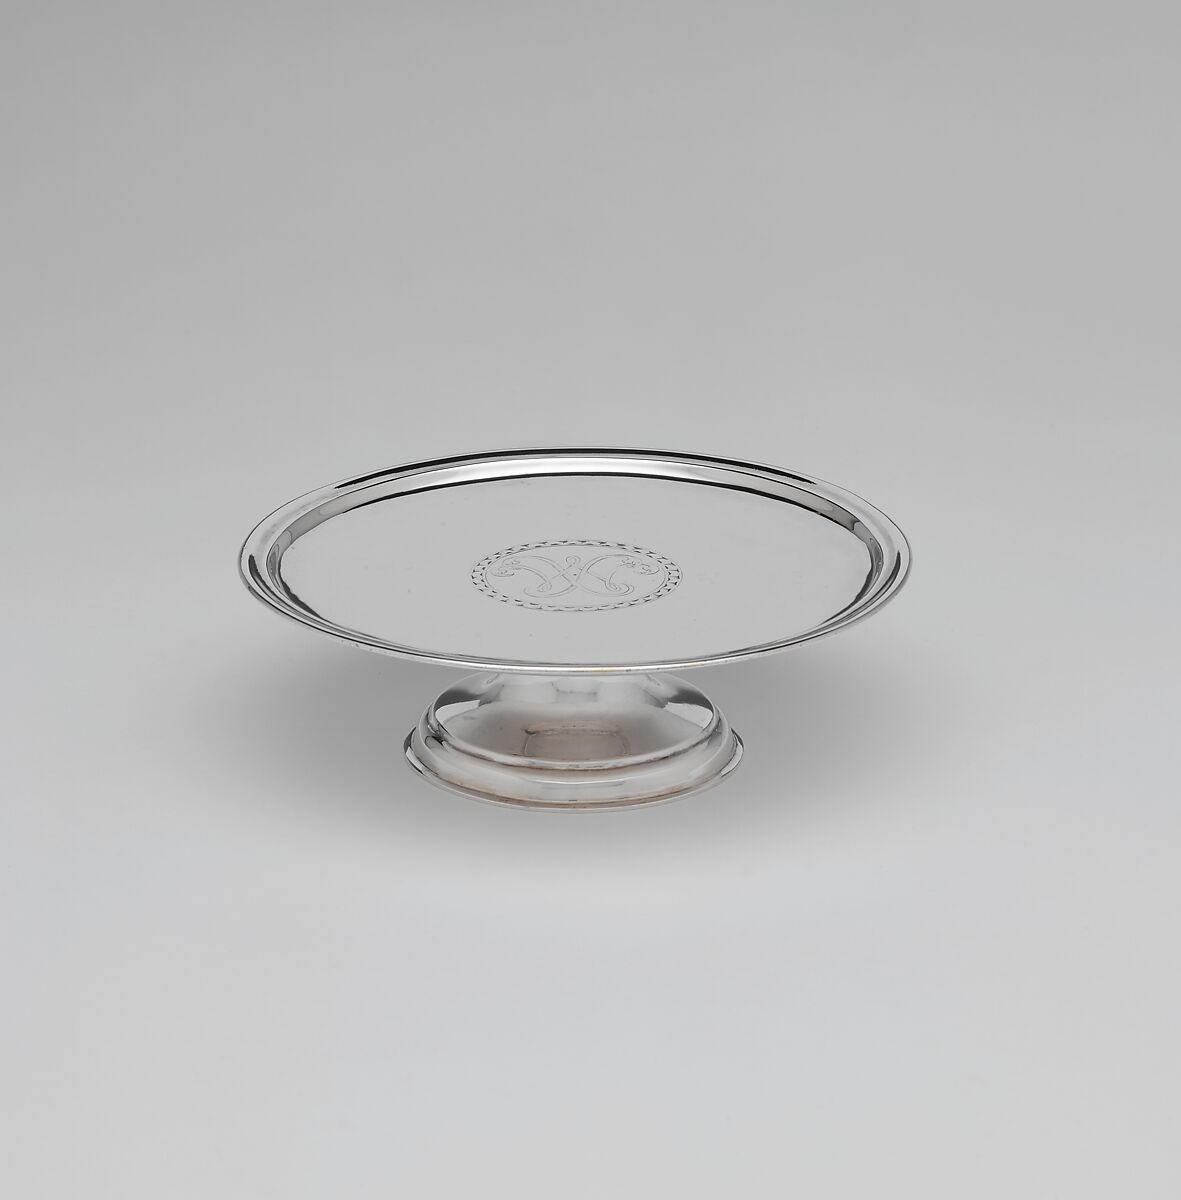 Footed Salver, Silver, American 